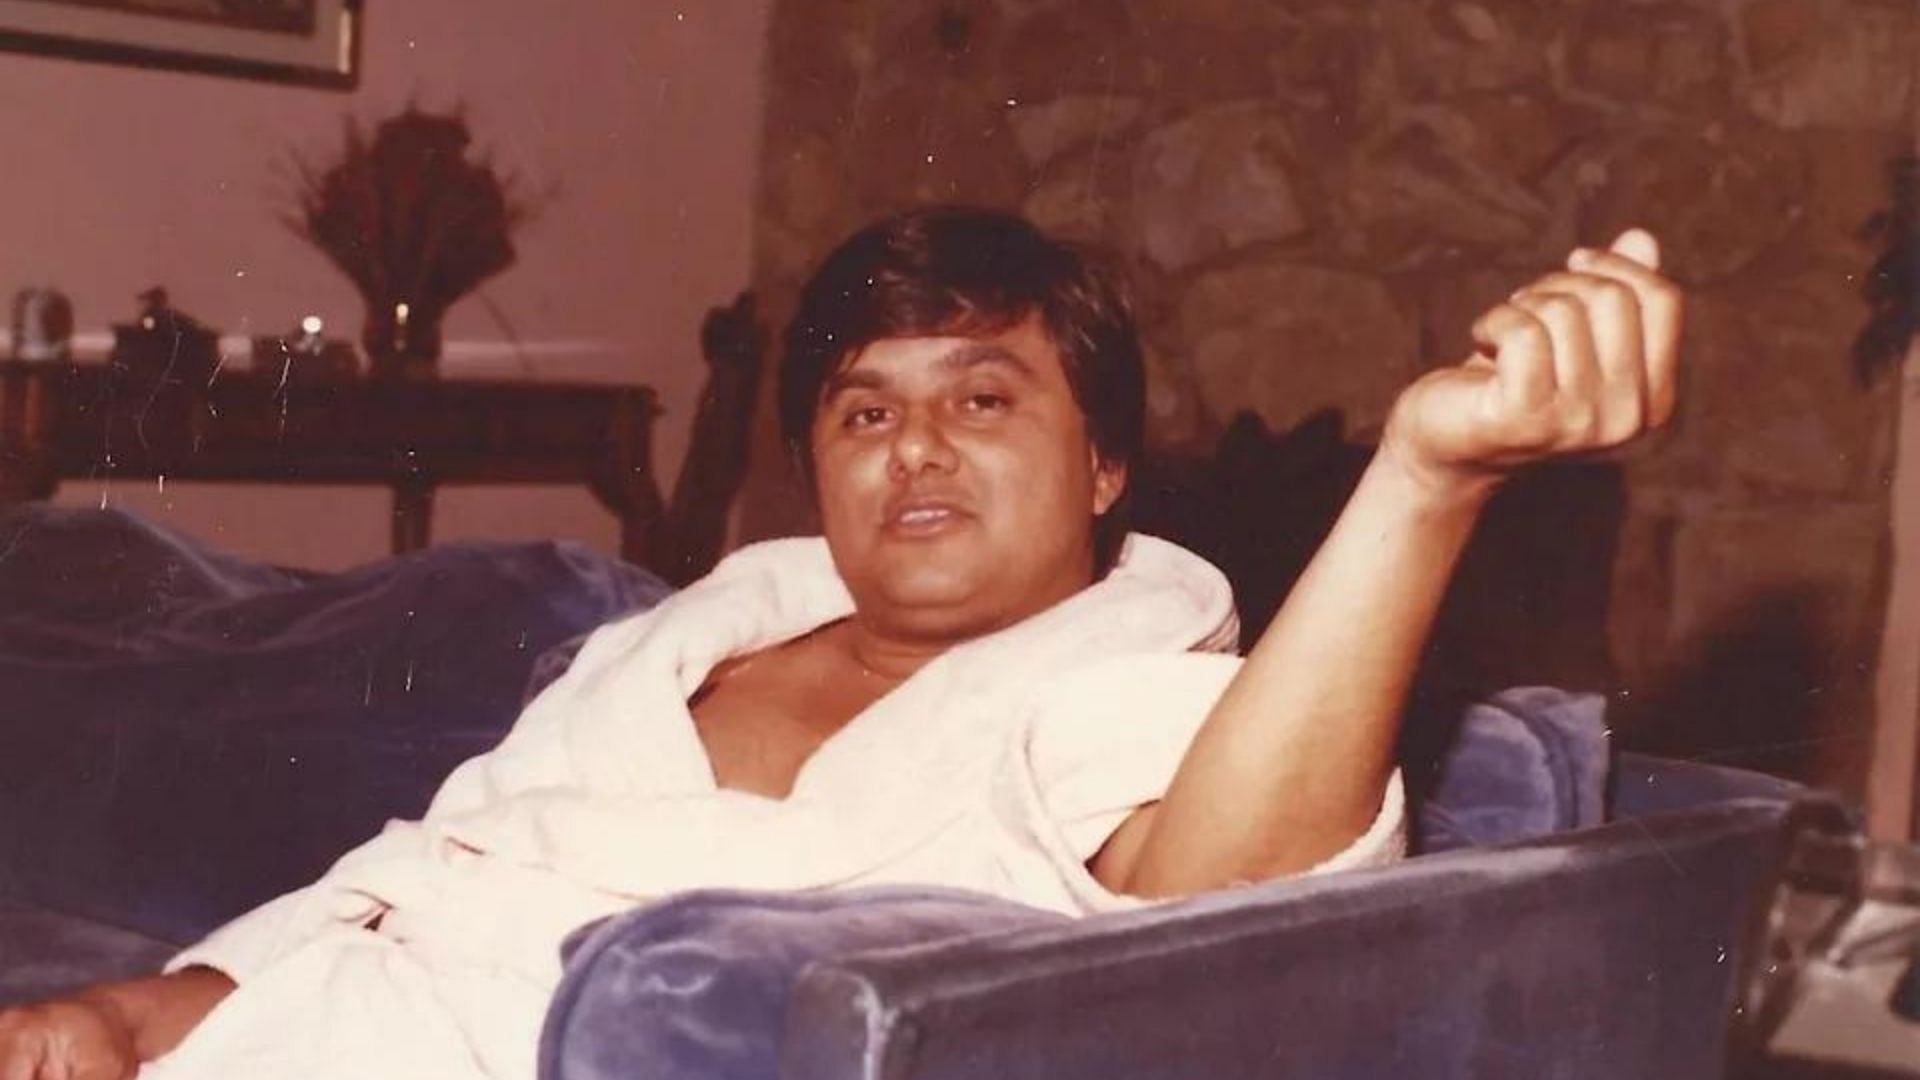 Steve Banerjee, founder of Chippendales, died by suicide (Image via A&amp;E)